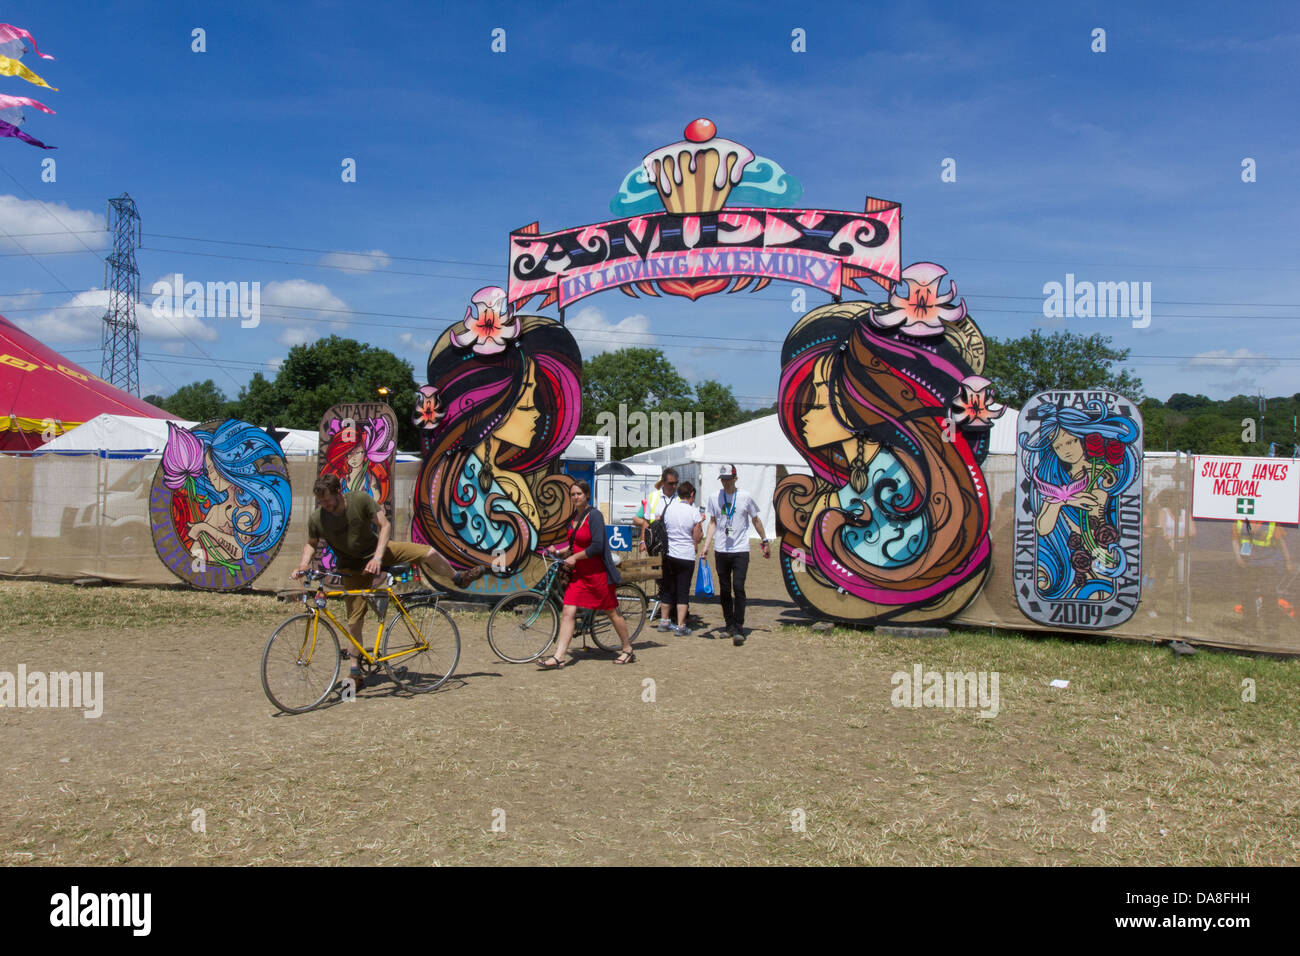 Silver Hayes the dance arena at the Glastonbury Festival 2013. Stock Photo